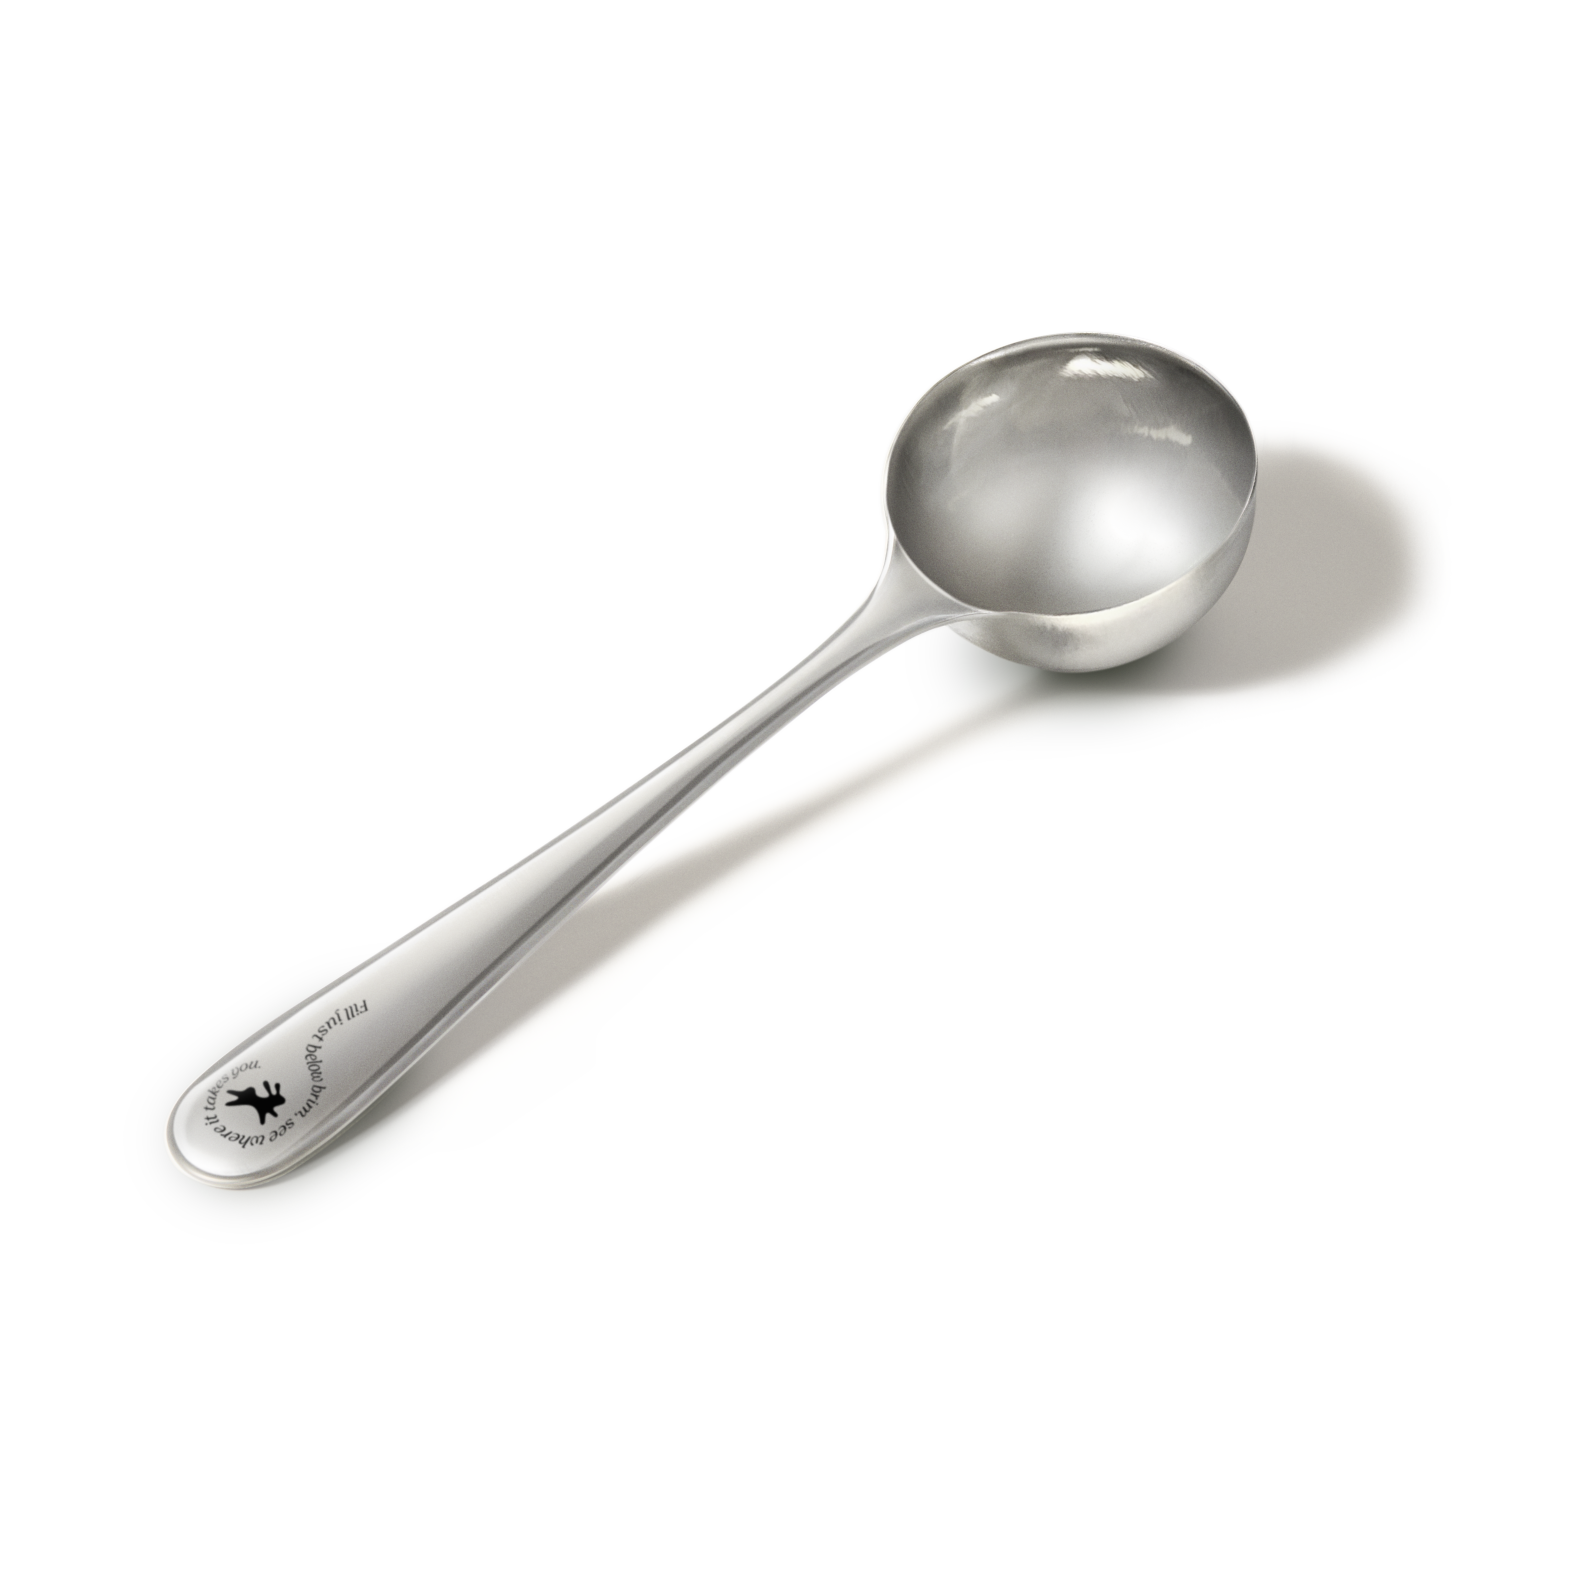 https://cdn.shopify.com/s/files/1/0262/2200/2236/products/Spoon-01.png?v=1648761033